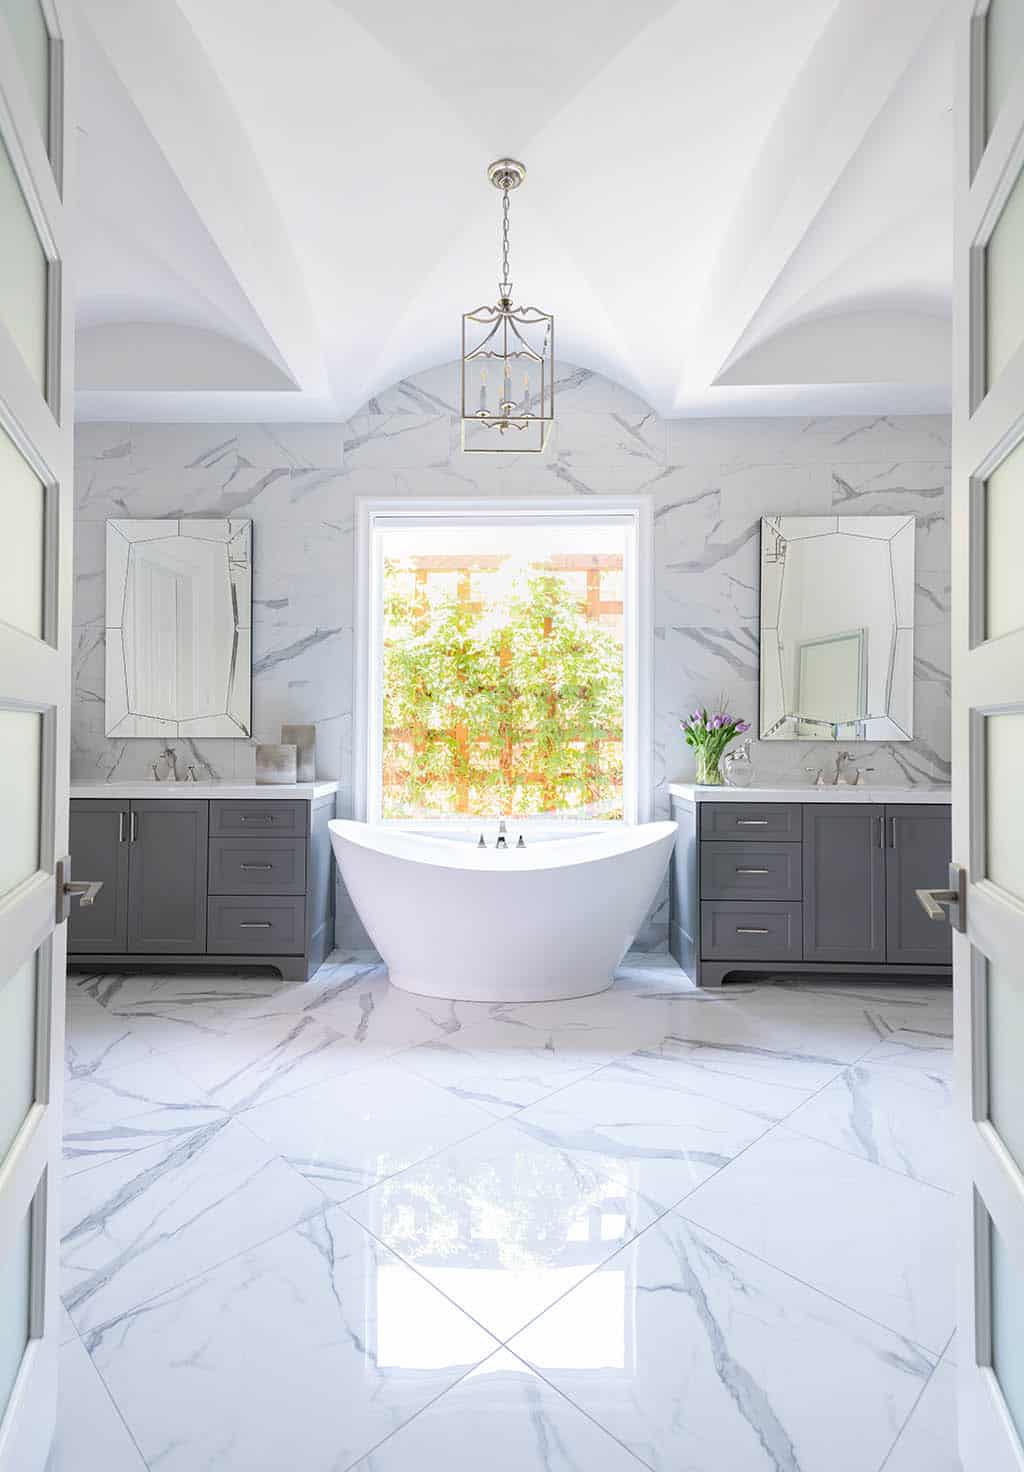 Bathrooms (The One That Fits Your Style)